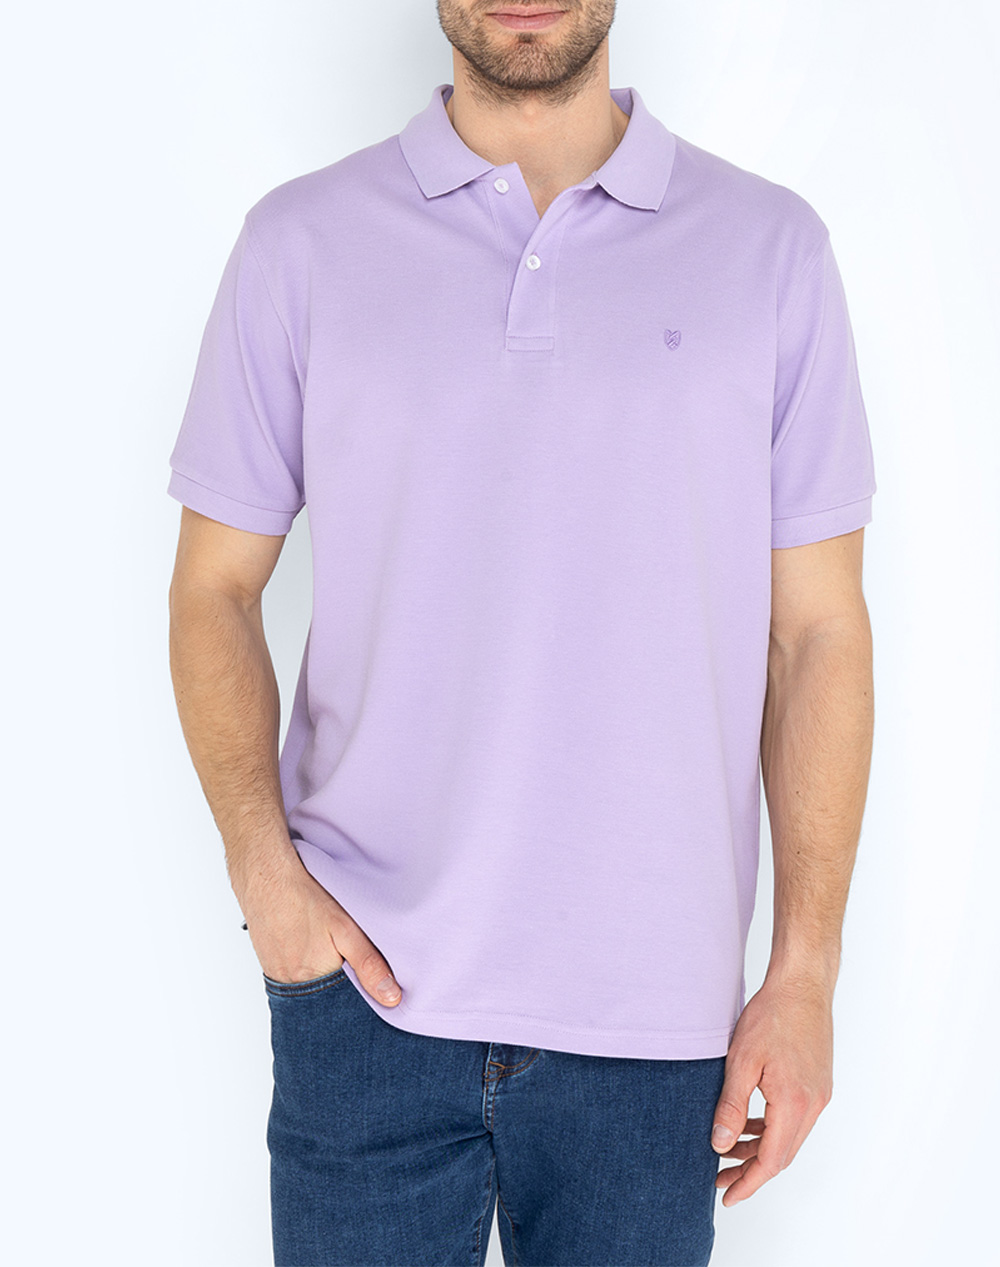 THE BOSTONIANS ΜΠΛΟΥΖΑ POLO PIQUE REGULAR FIT 3PS0001-LILAC Lilac